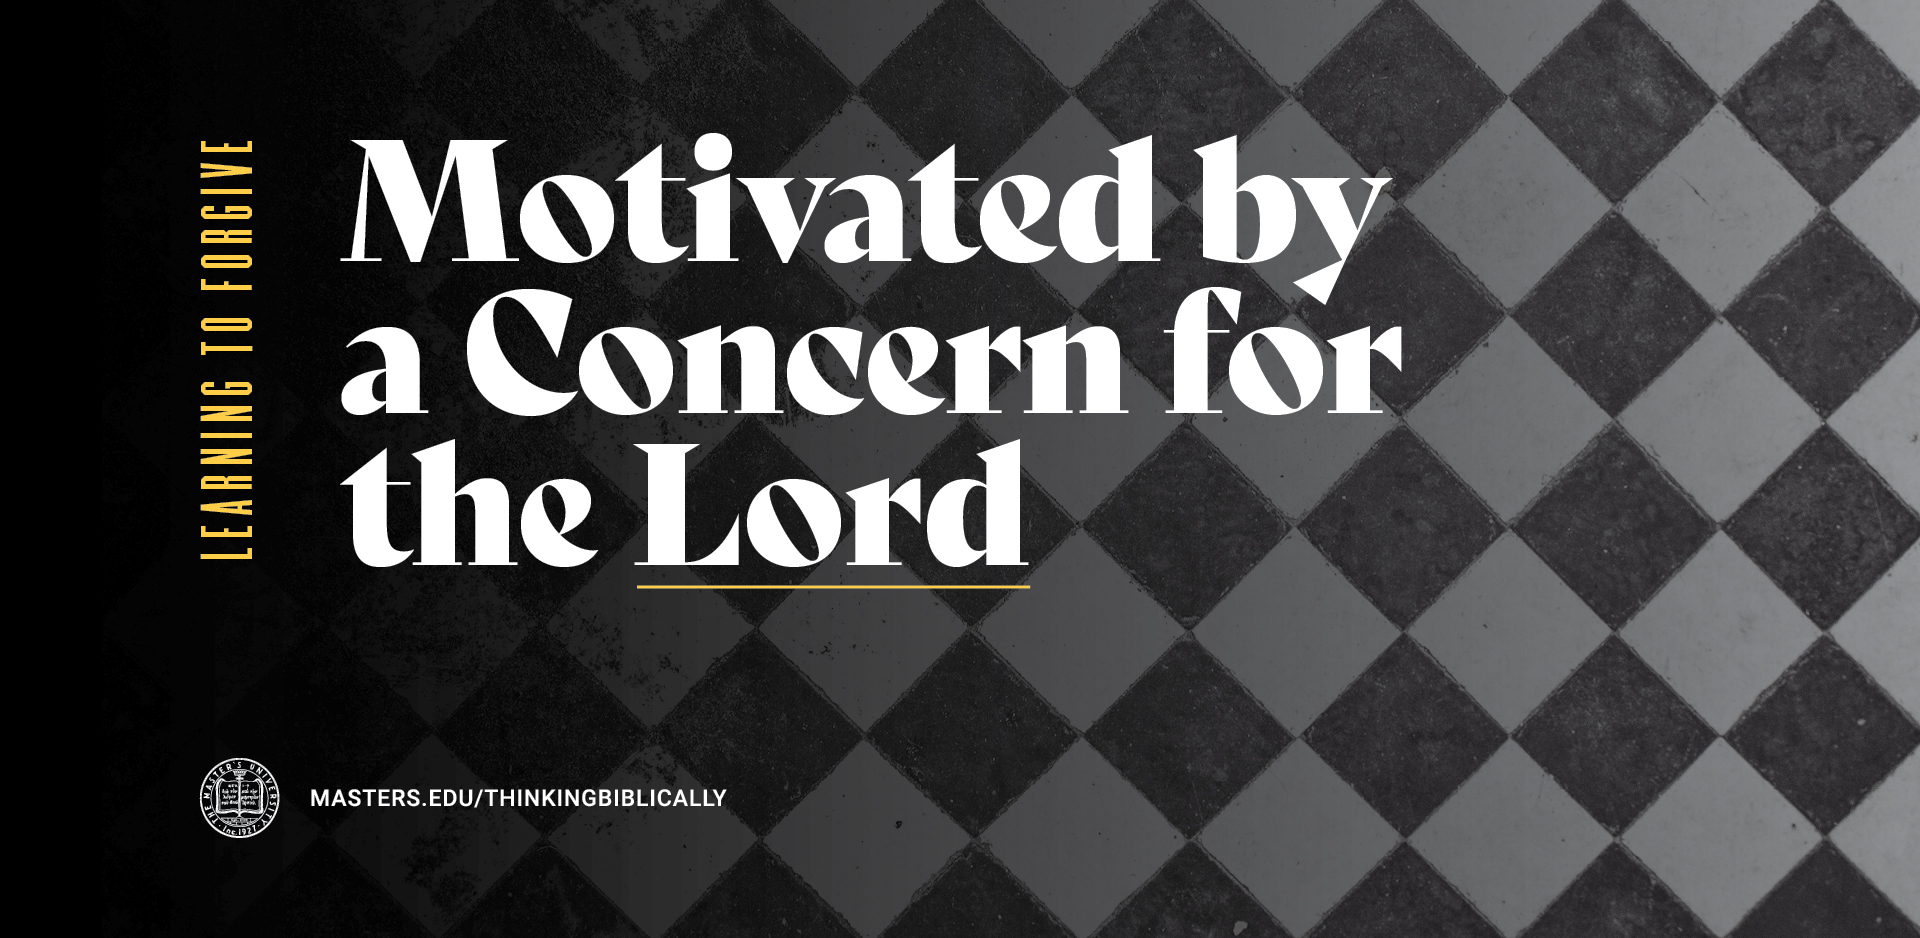 Motivated by a Concern for the Lord Featured Image